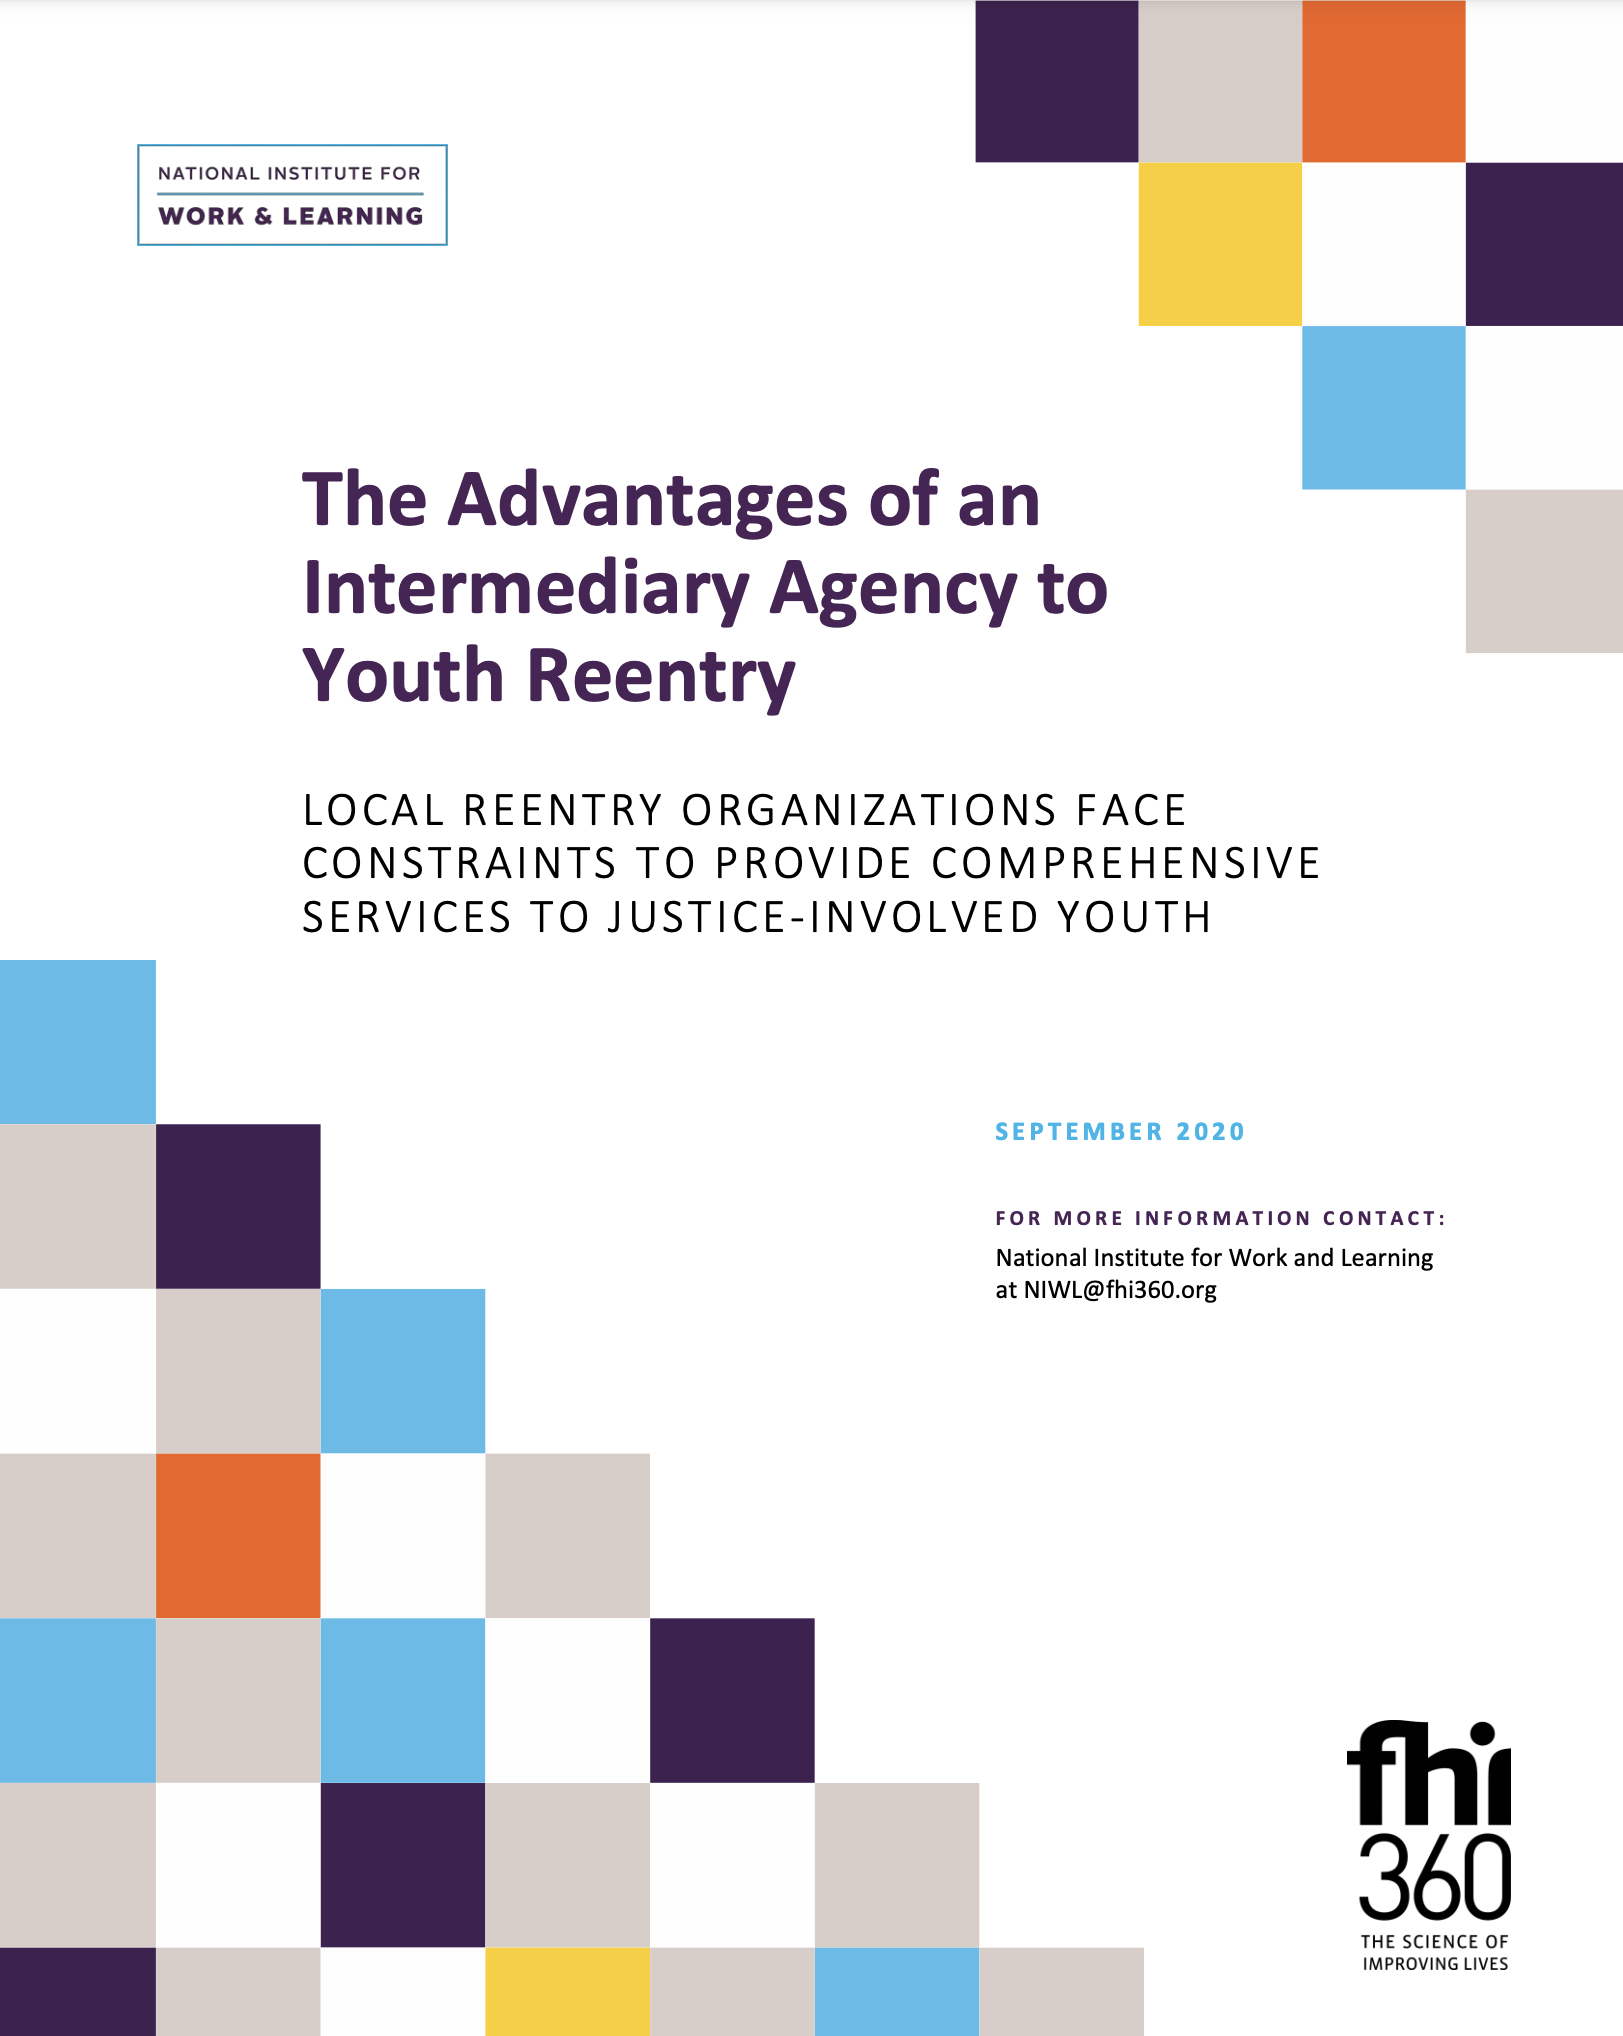 The_Advantages_of_an_Intermediary_Agency_to_Youth_Reentry